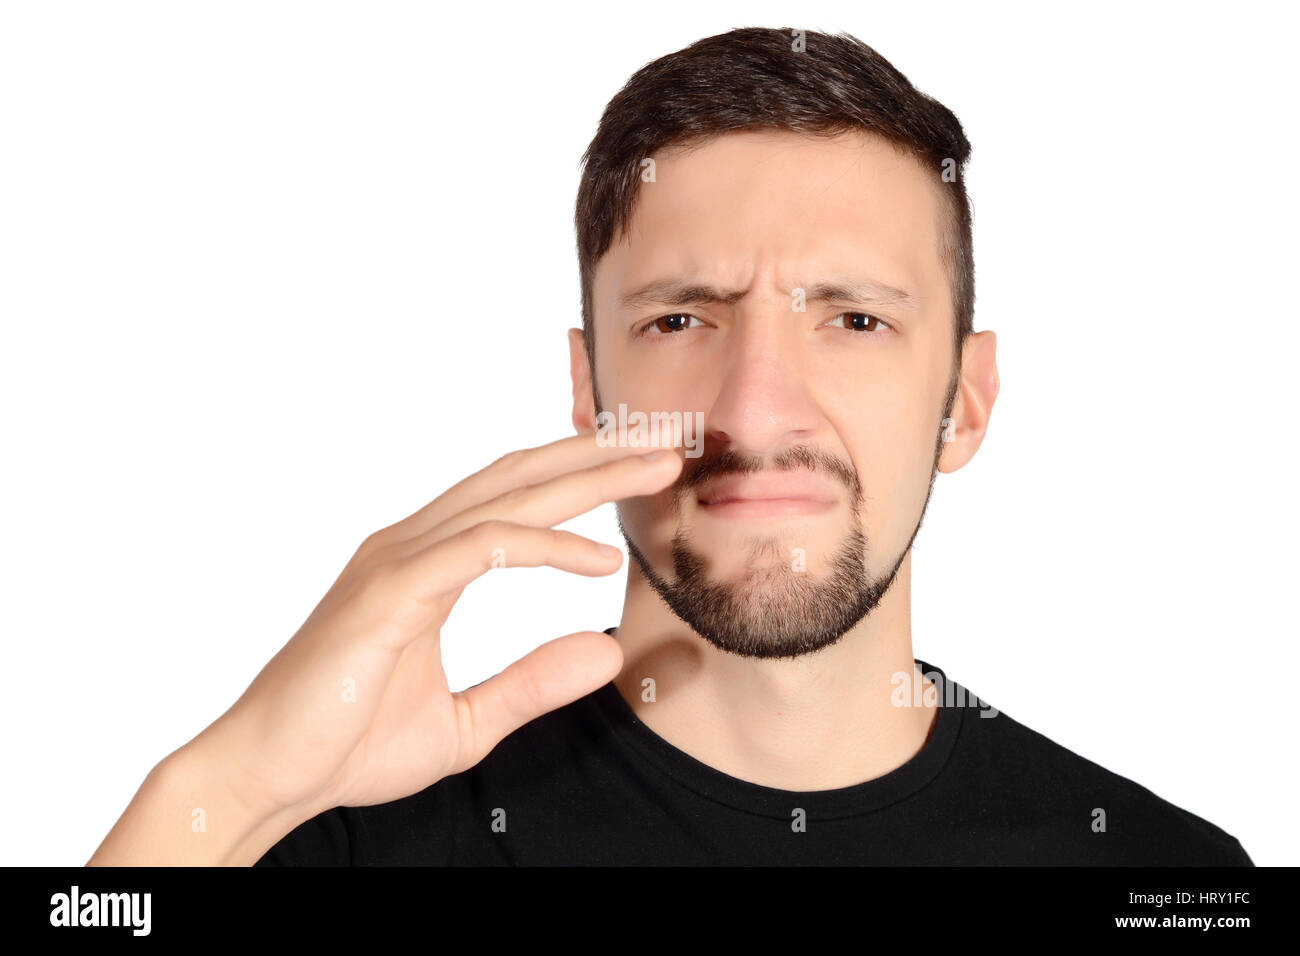 Portrait of young man holding his nose against a bad smell. Isolated white background. Stock Photo